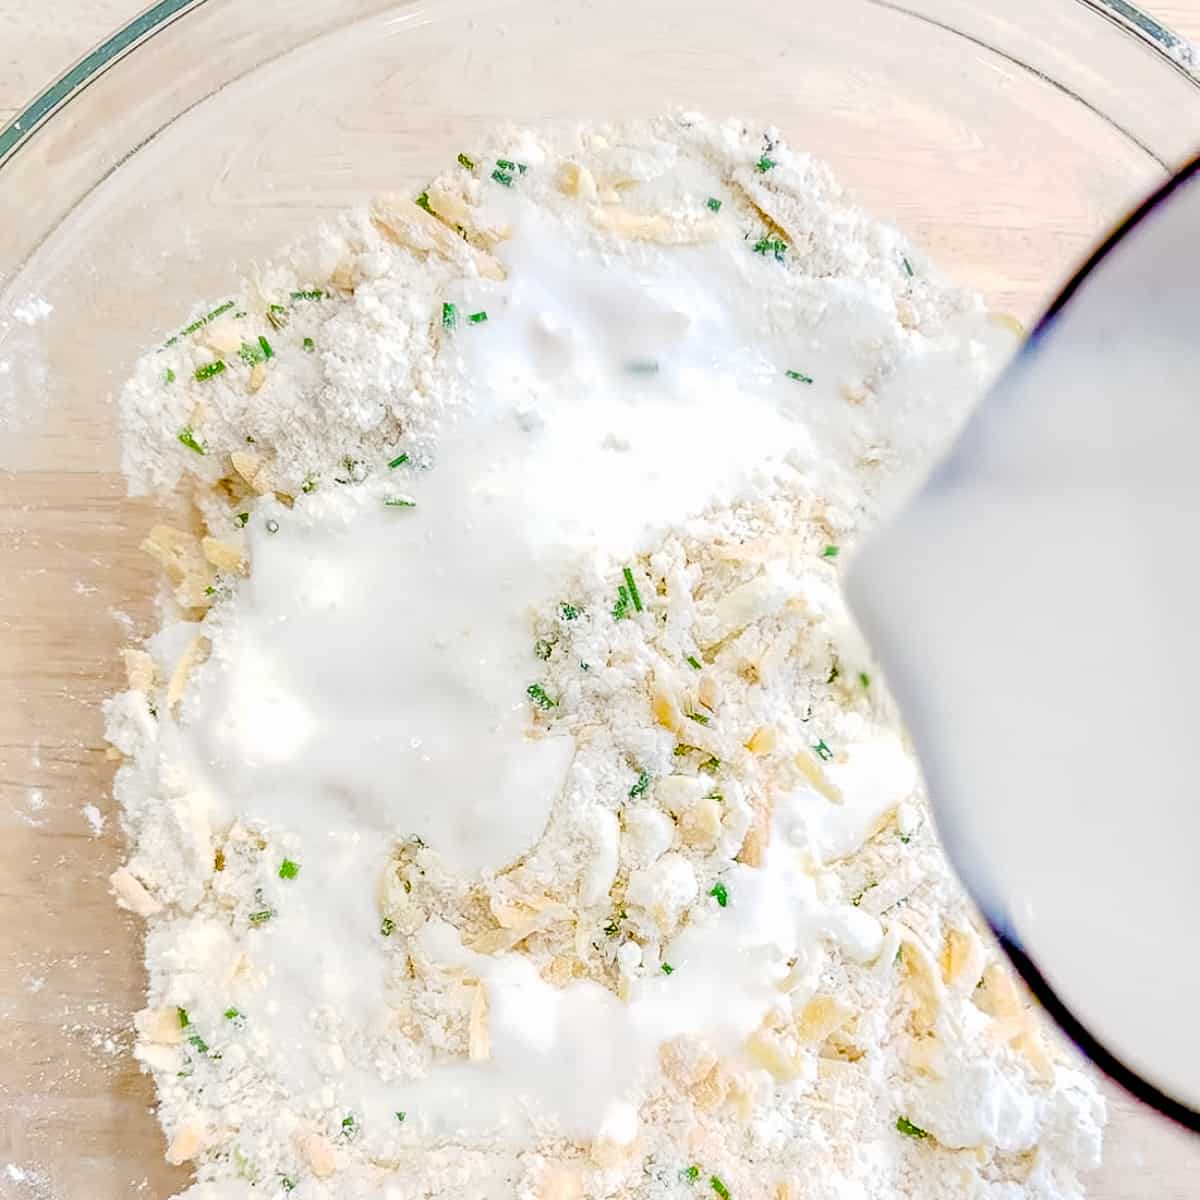 pouring buttermilk into chaddar chive biscuit ingredients.